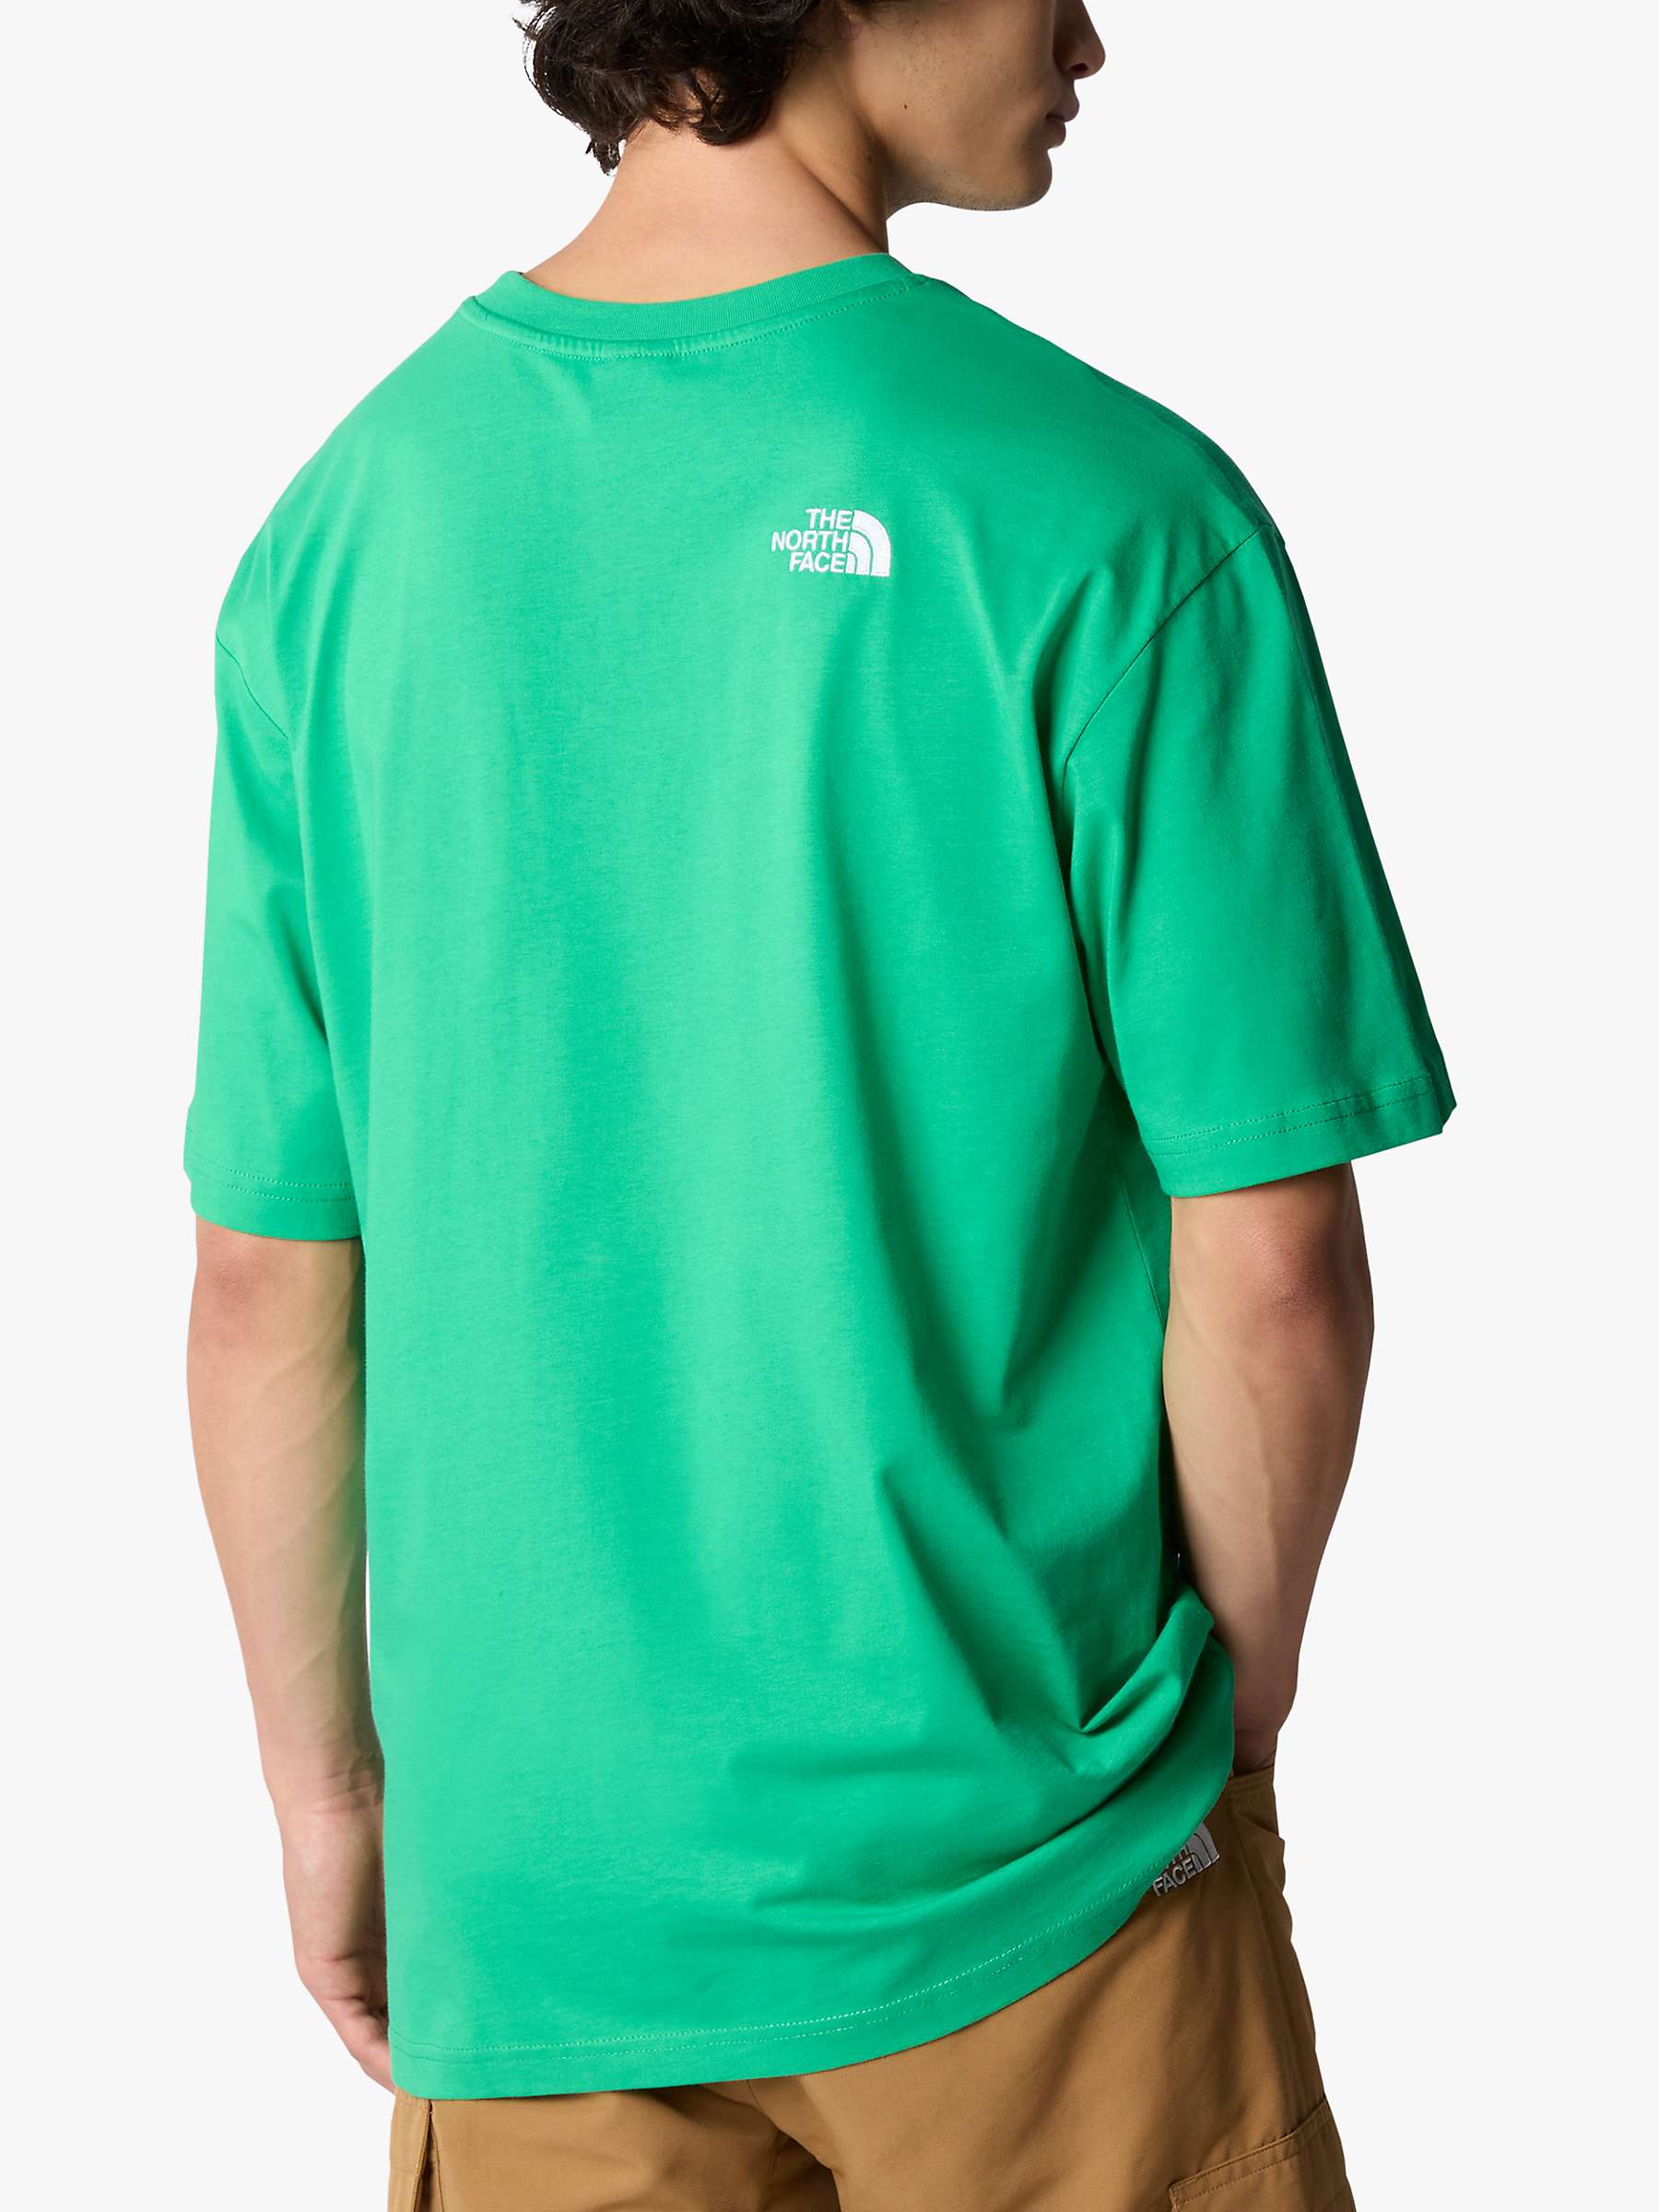 Buy The North Face Oversized Dome T-Shirt, Optic Emerald Online at johnlewis.com